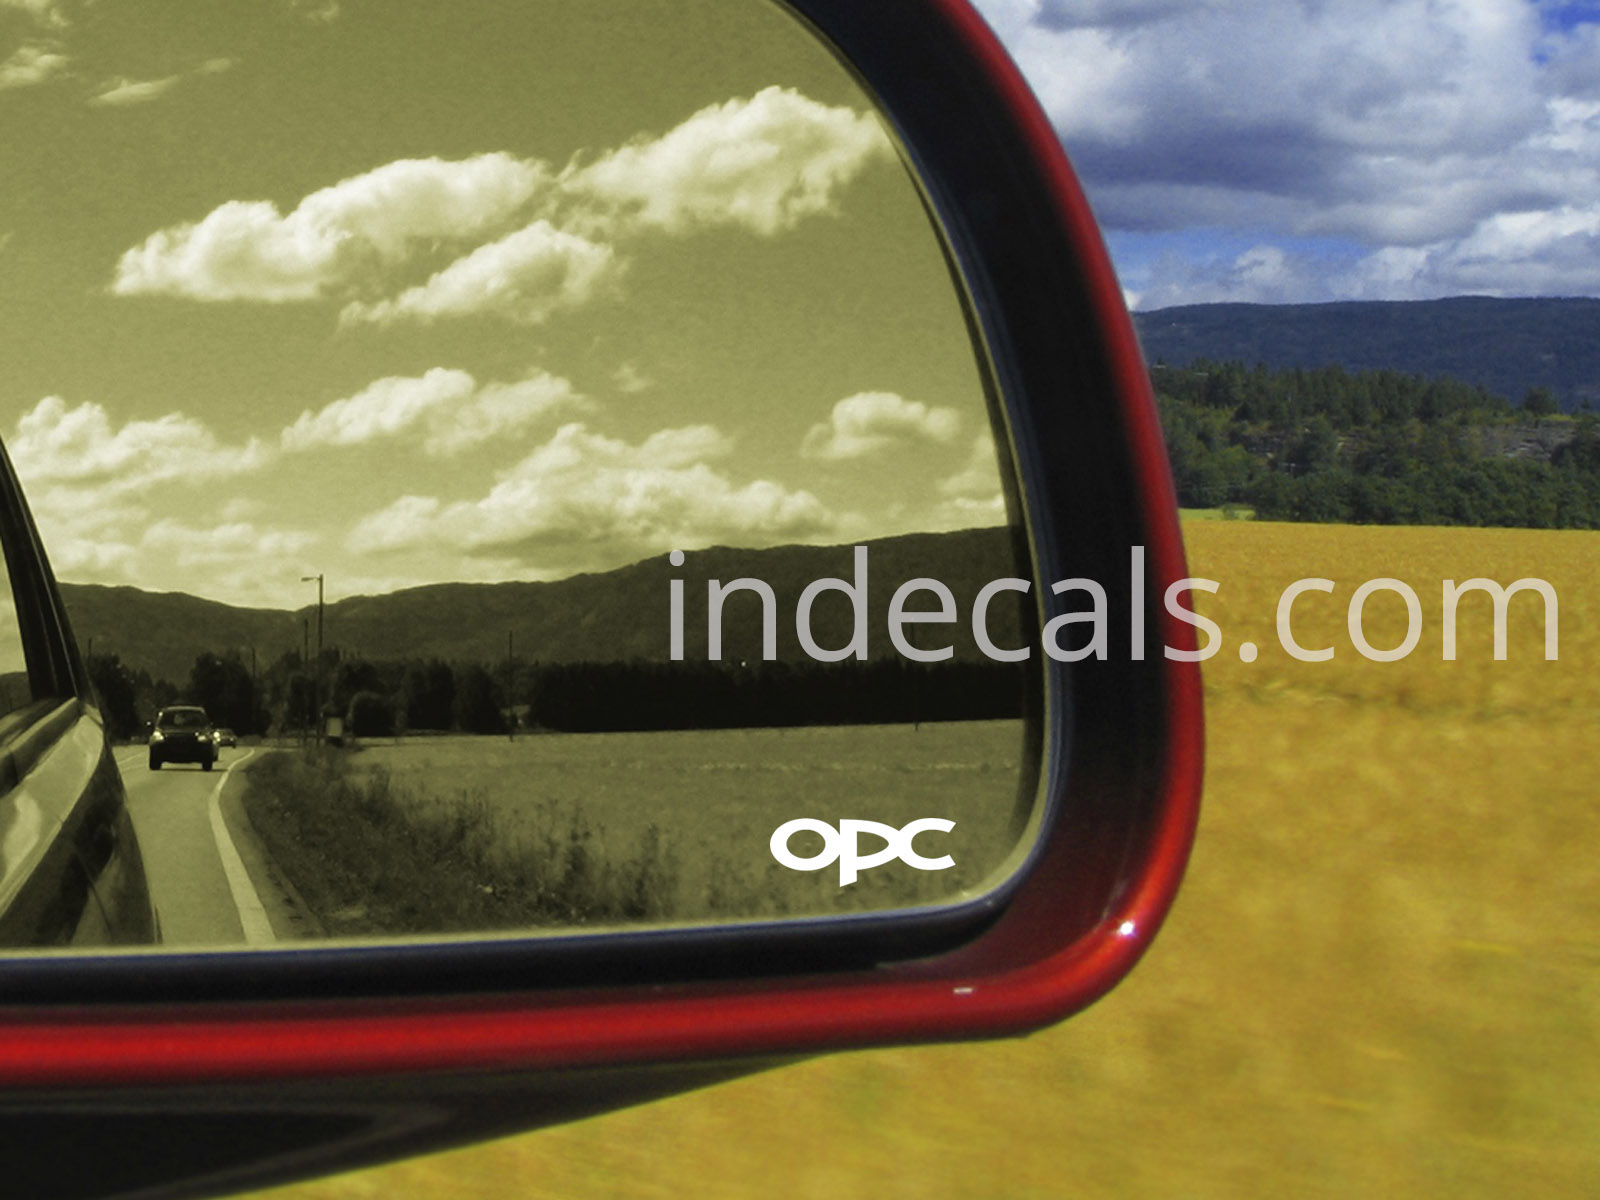 3 x Opel OPC Stickers for Mirror Glass - White